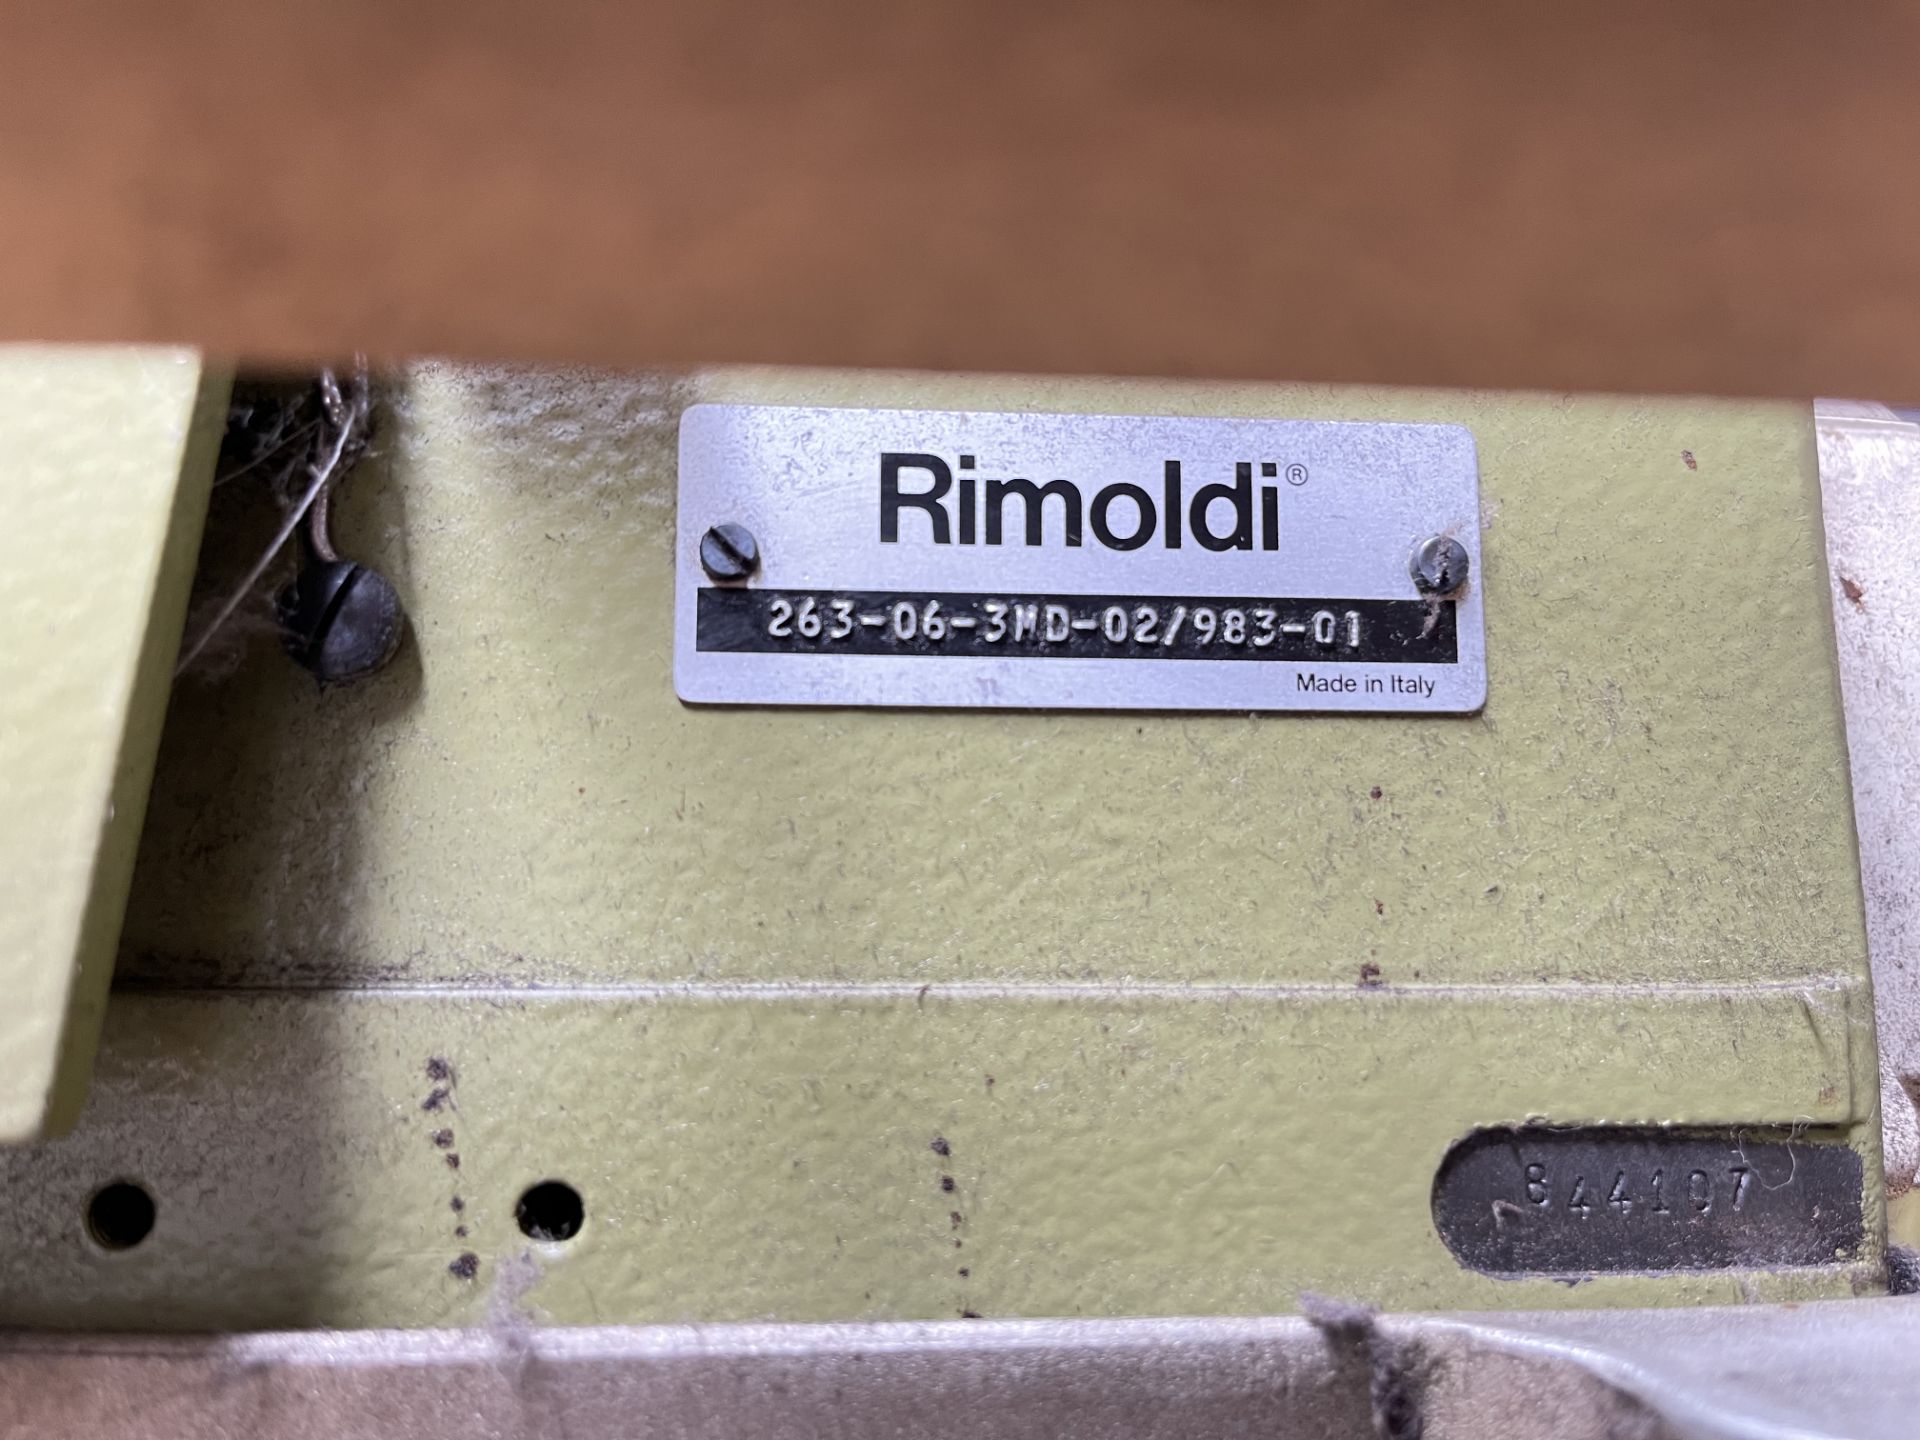 Rimoldi 263 06 3MD-02/903-01 Industrial Sewing machine. S/No 844107 - Image 7 of 8